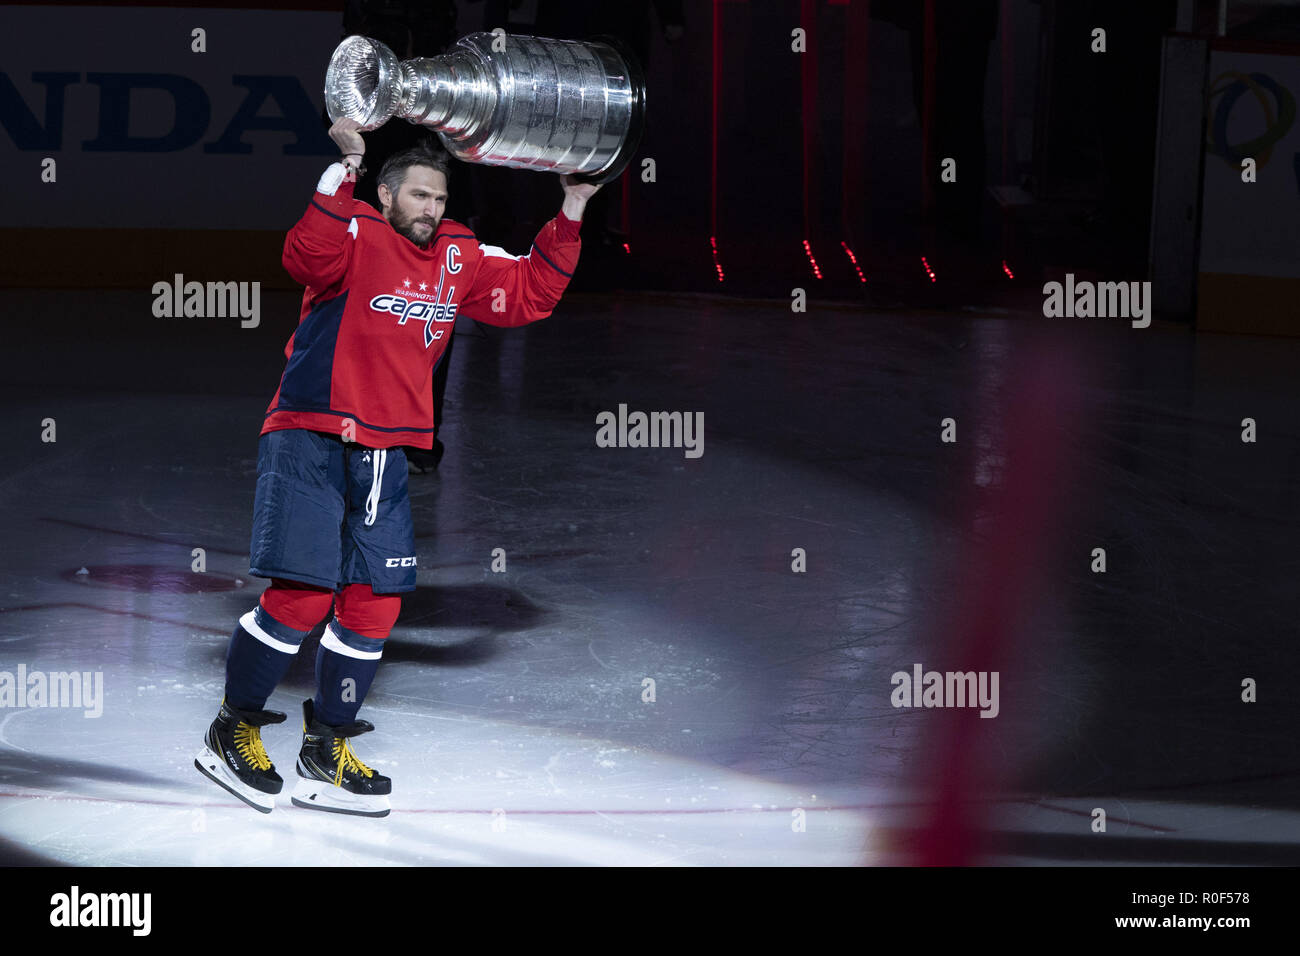 Washington, DC, USA. 3rd Oct, 2018. Washington Capitals left wing Alex Ovechkin (8) raises the Stanley Cup as he takes the ice during the Stanley Cup banner raising ceremony prior to the game between the Boston Bruins and Washington Capitals at Capitol One Arena in Washington, DC on October 3, 2018. The Washington Capitals won the 2018 Stanley Cup. Credit: Alex Edelman/ZUMA Wire/Alamy Live News Stock Photo